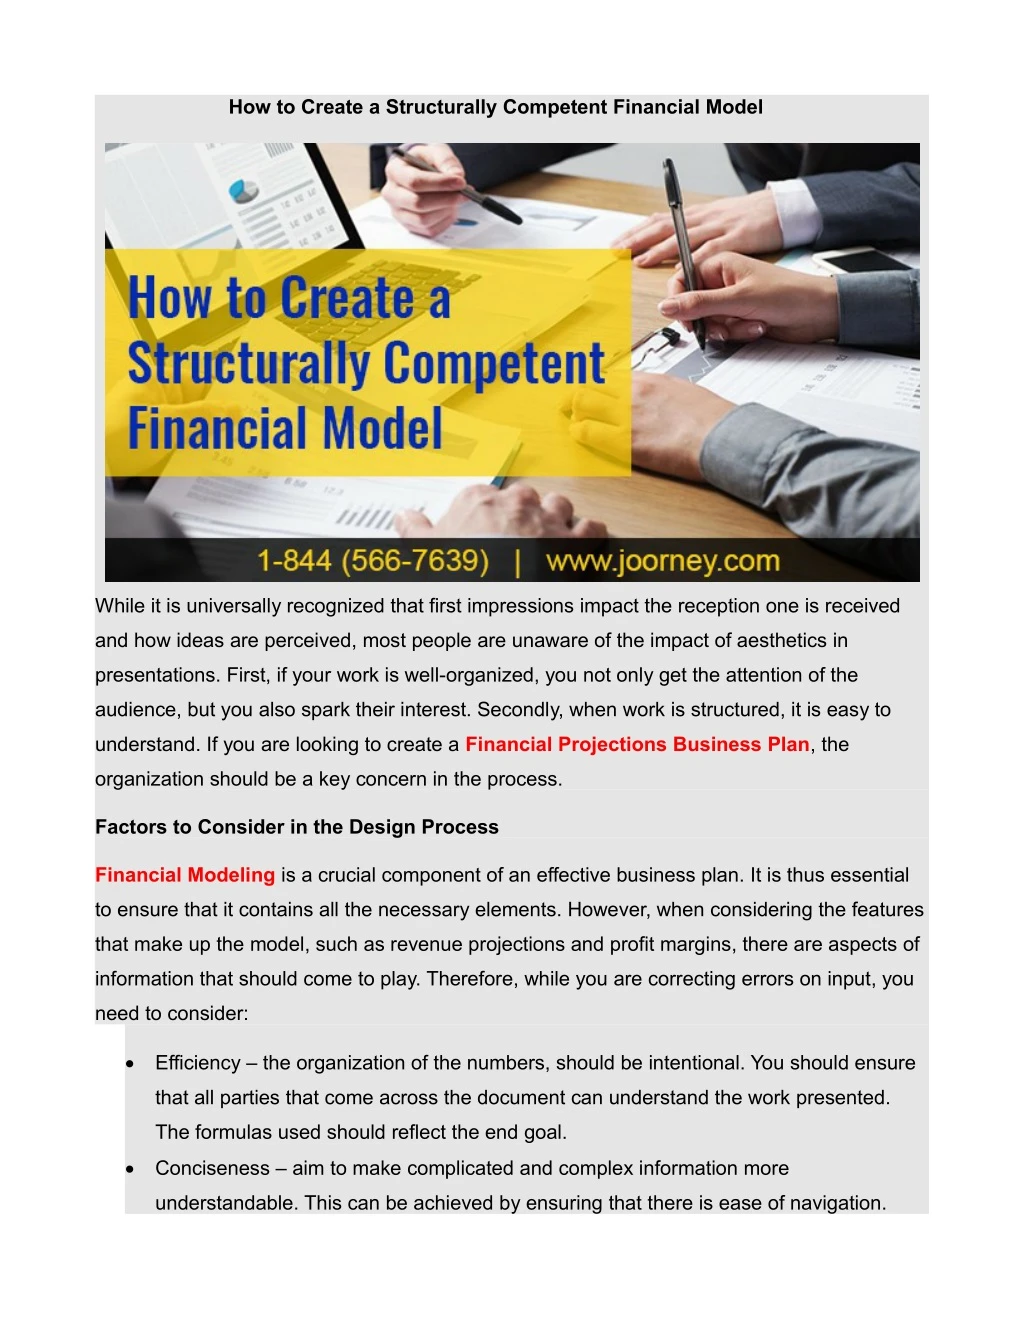 how to create a structurally competent financial